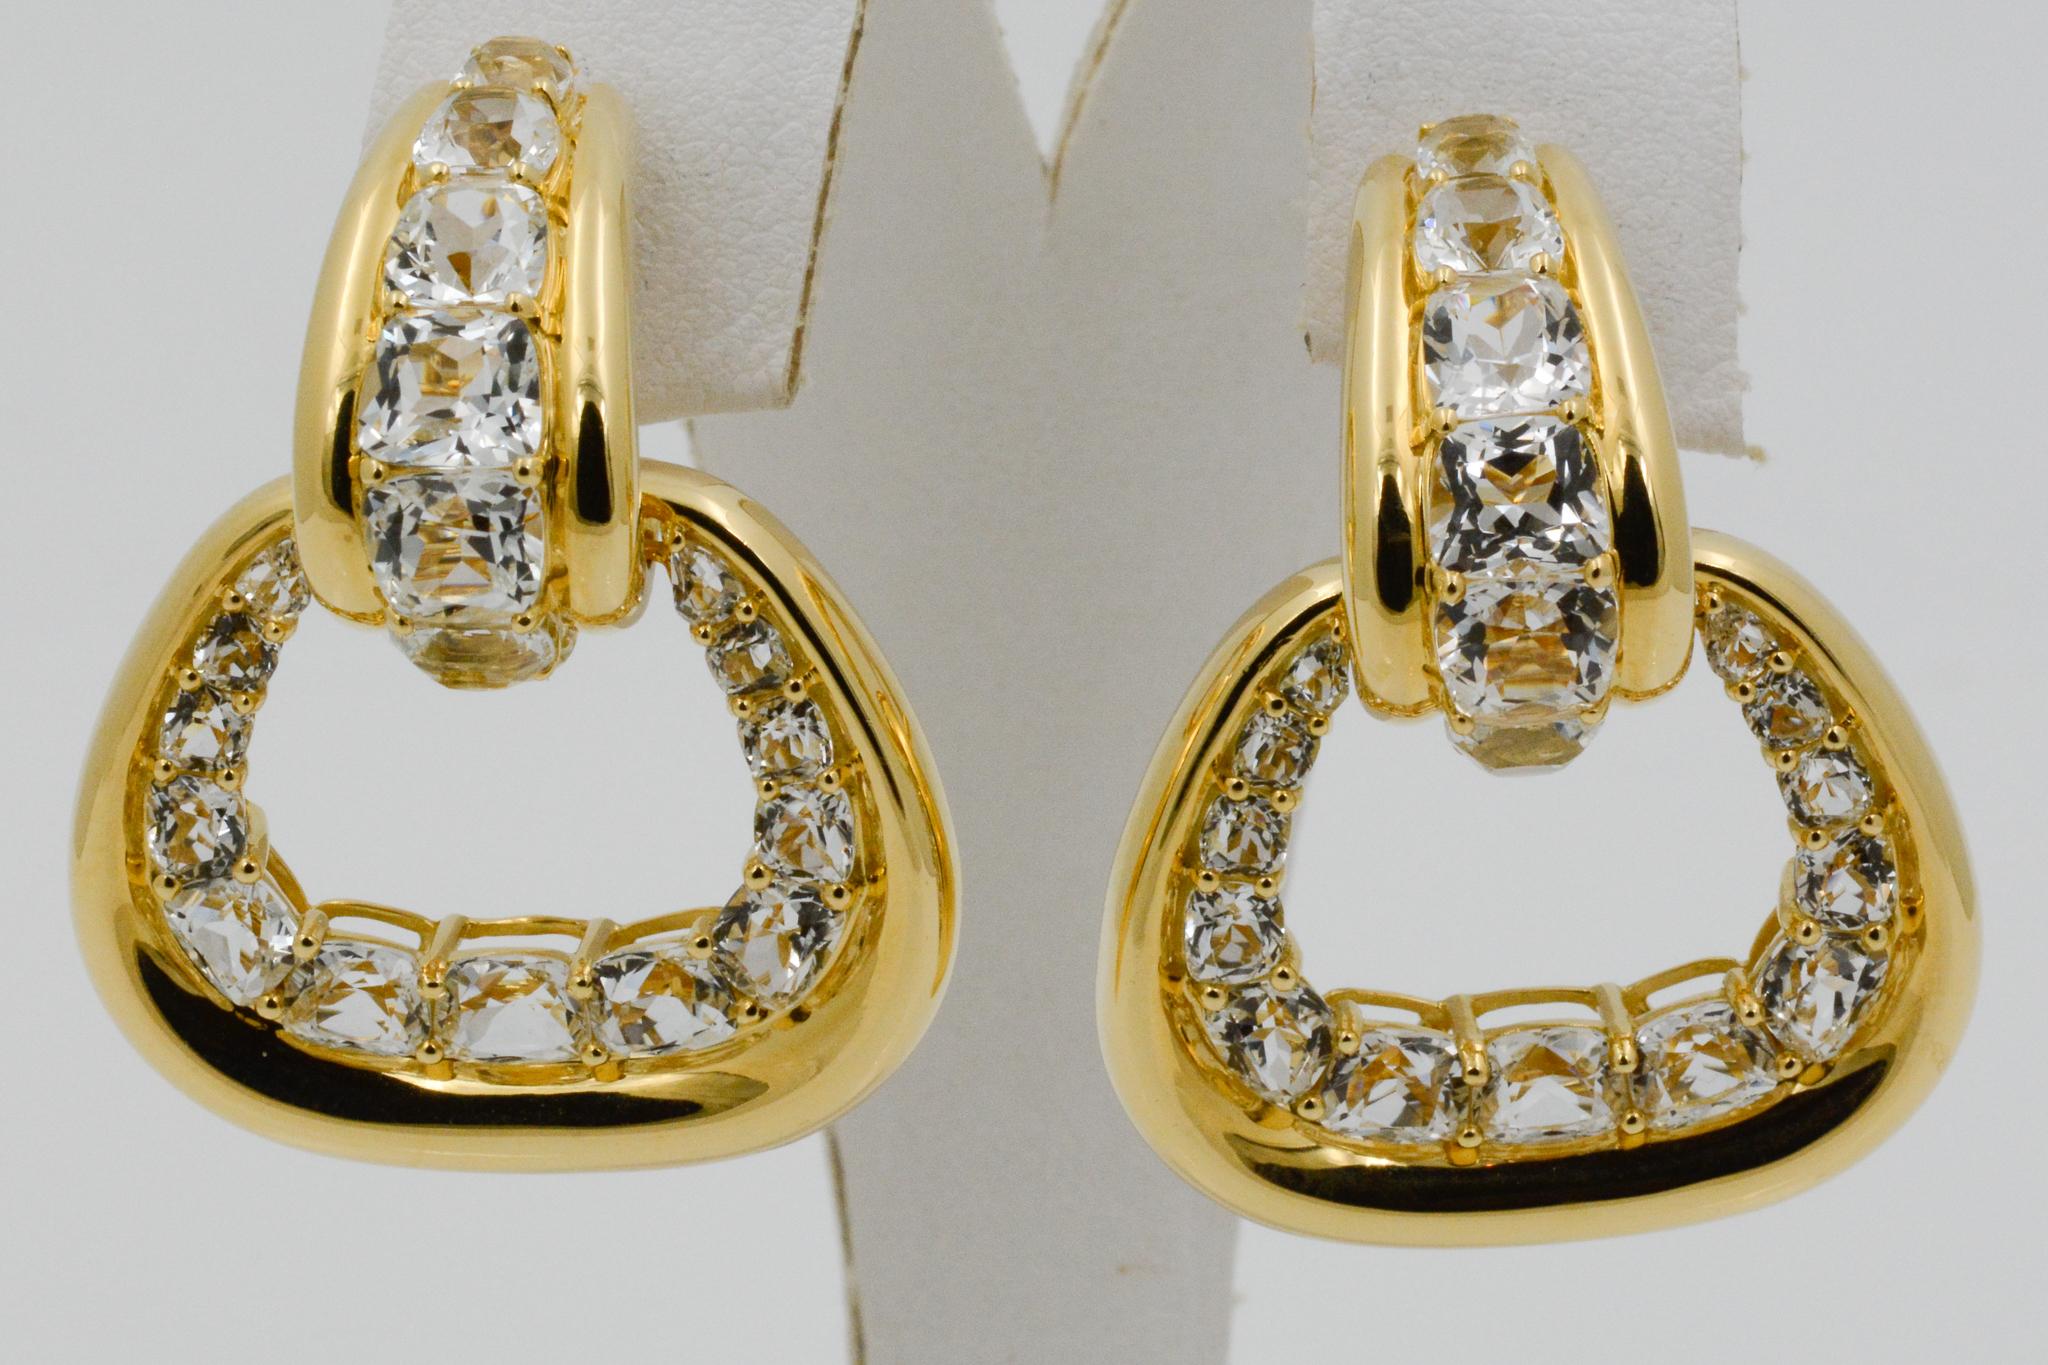 From Seaman Schepps, these 18 karat yellow gold Madison hoop earrings feature 14 white topaz on top and 26 white topaz on the removable buckle. The earrings have clip back and are signed Seaman Schepps.